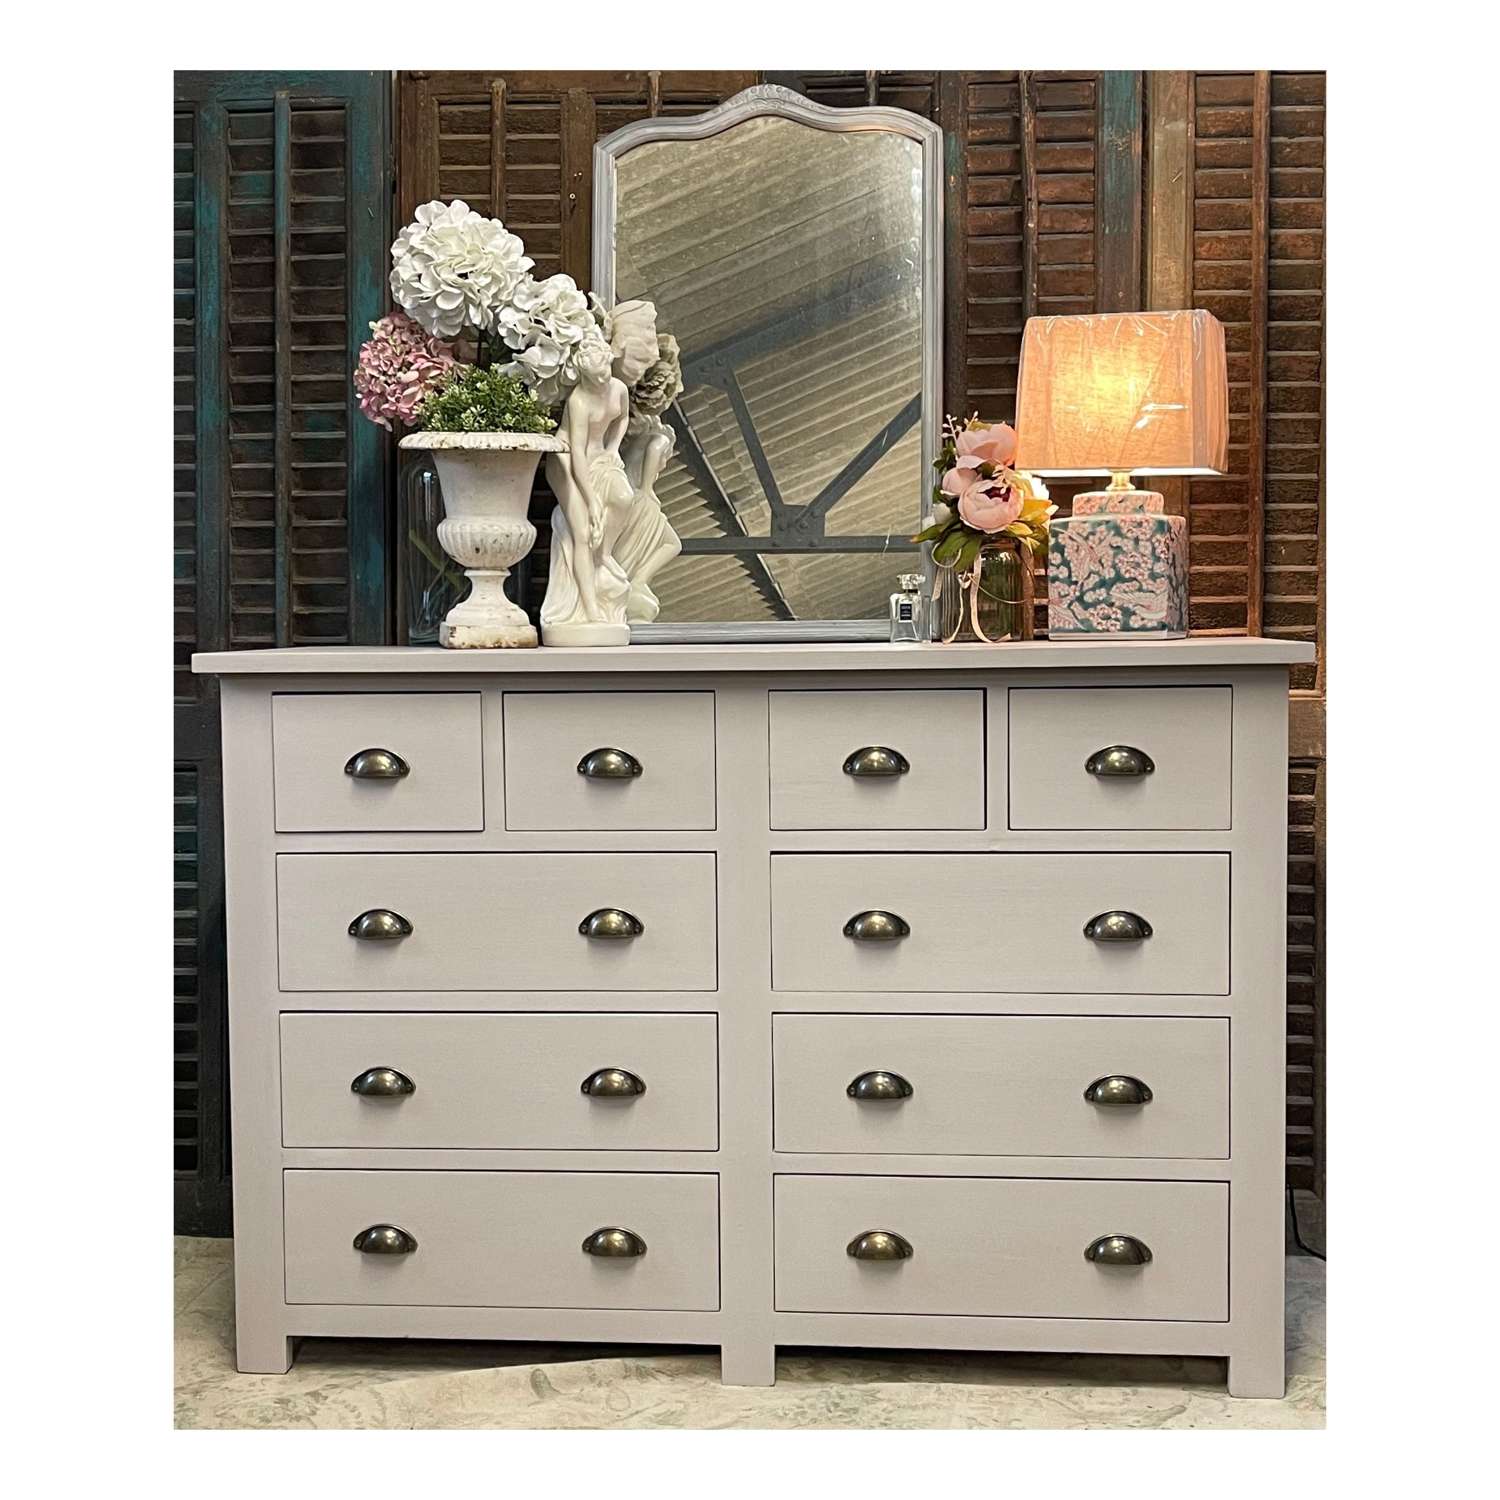 Double set of drawers